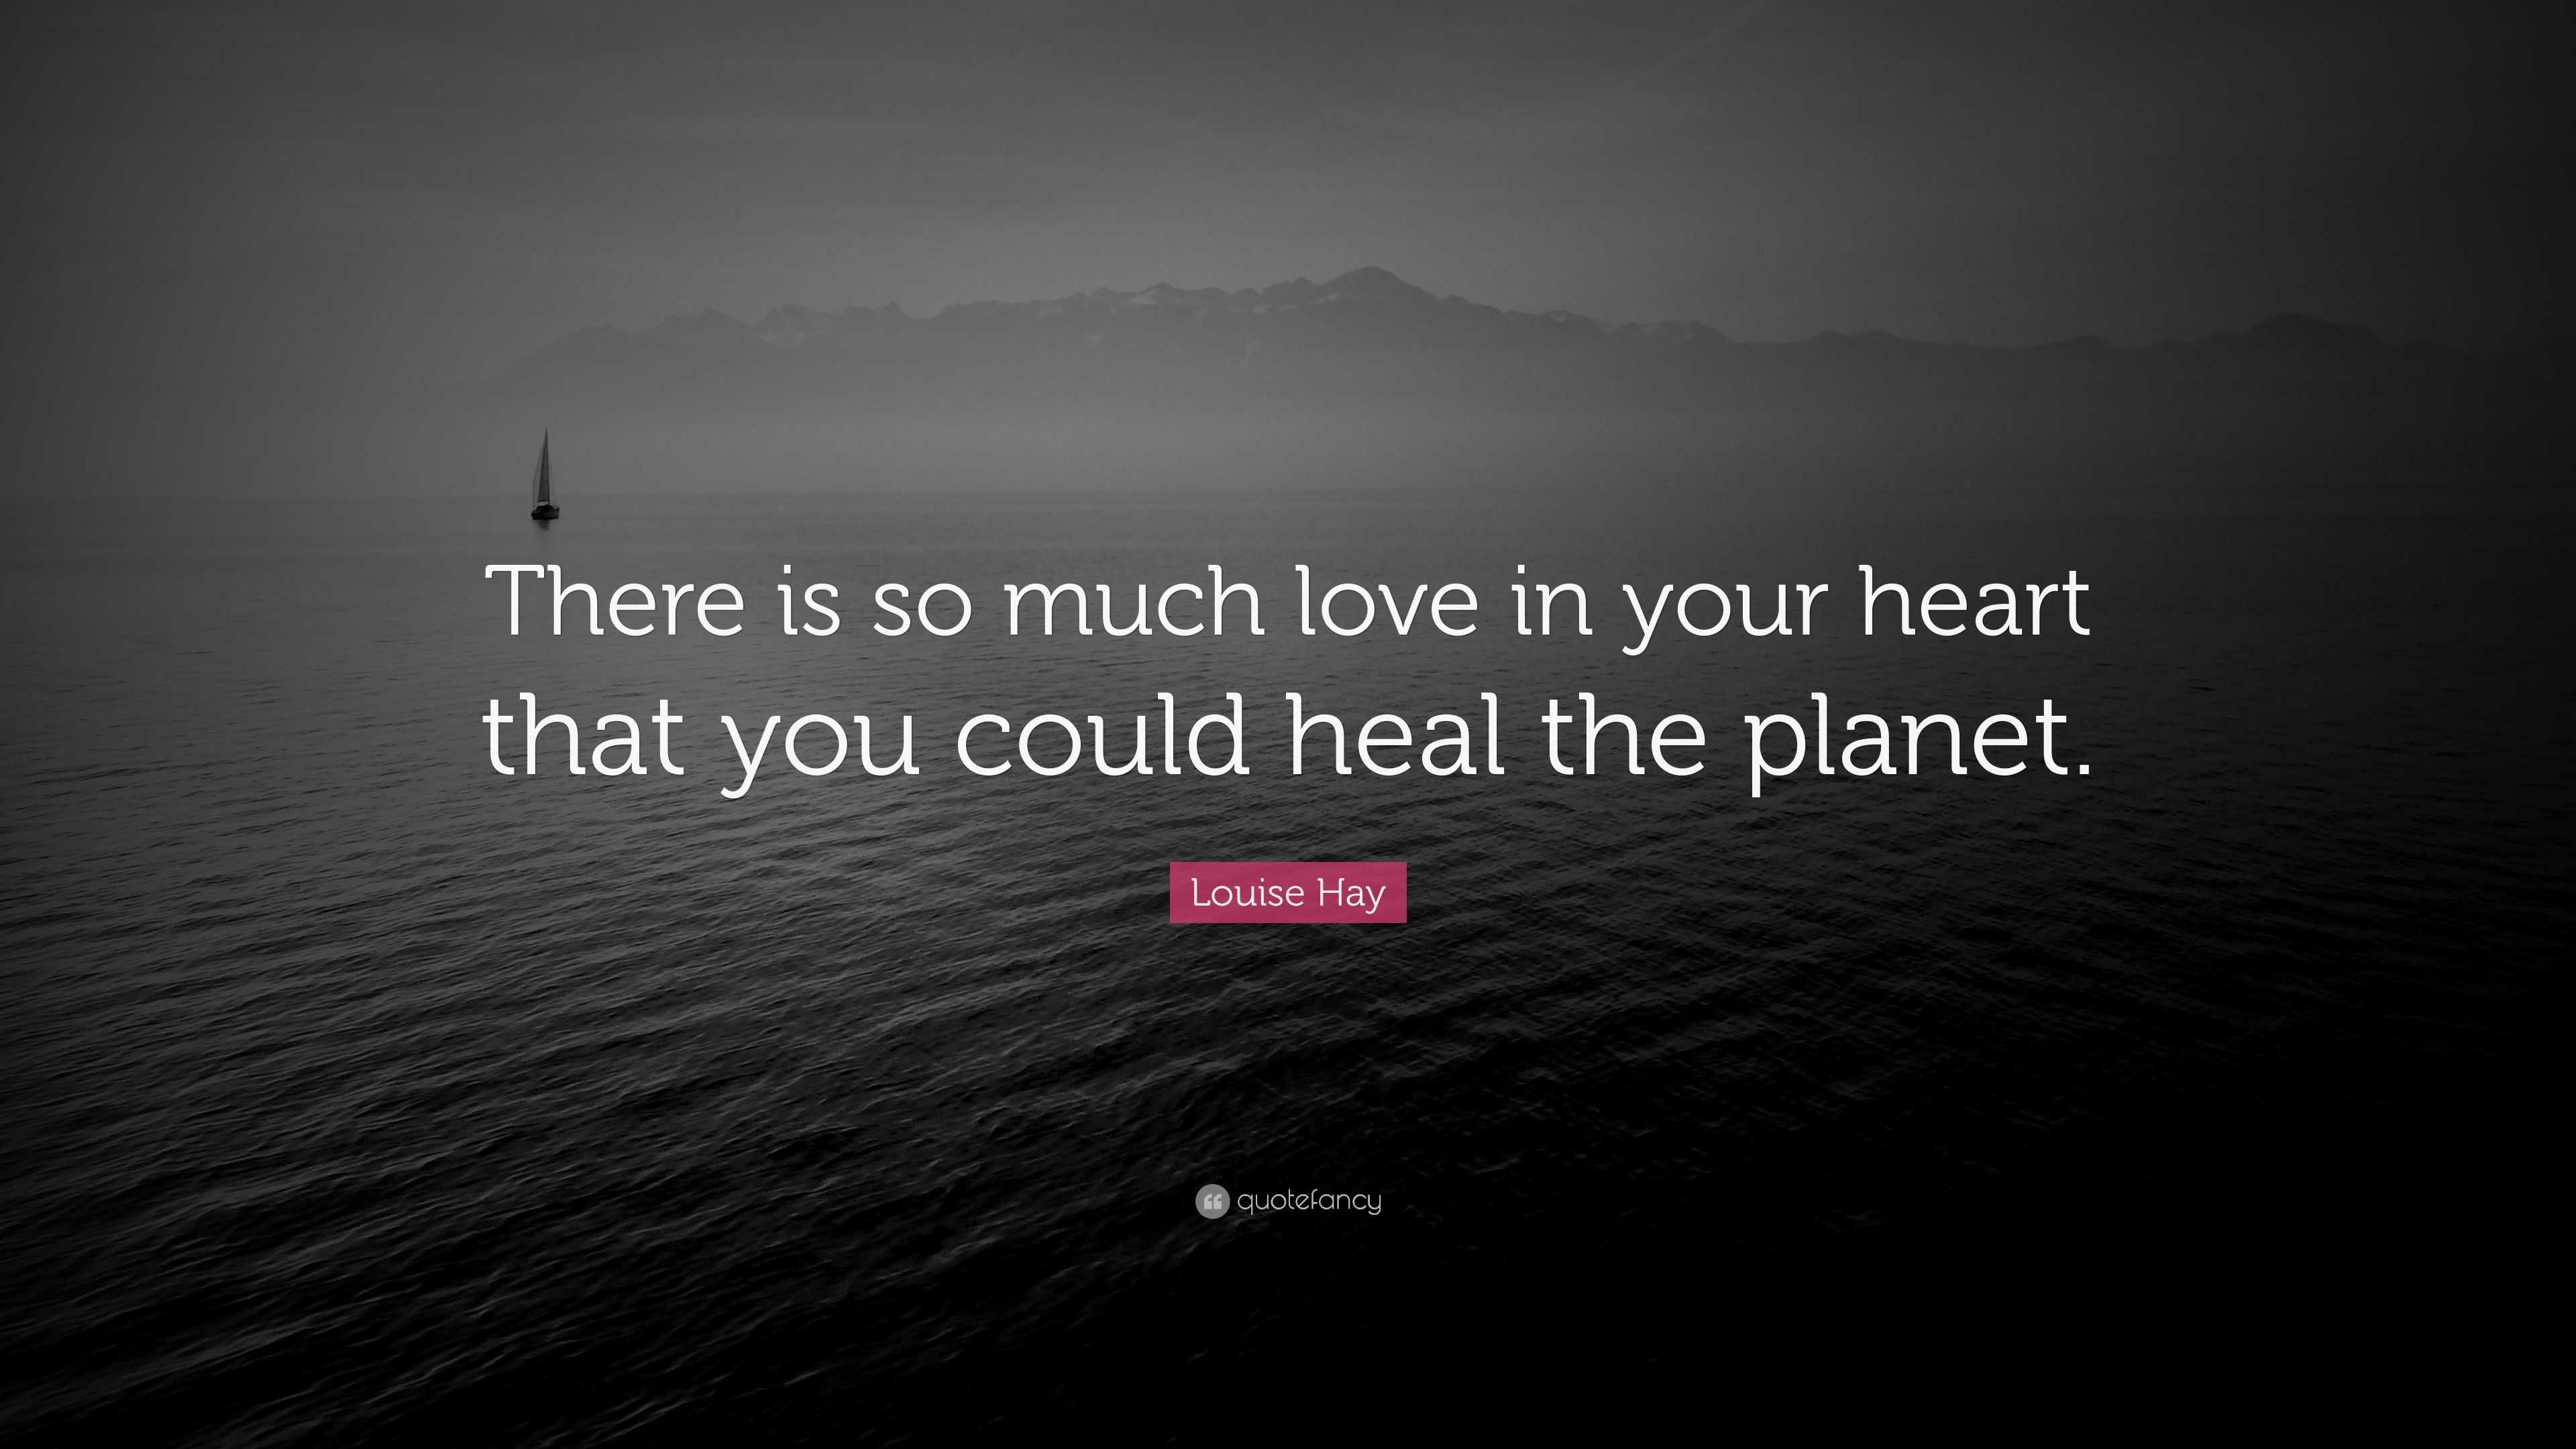 Louise Hay Quote “There is so much love in your heart that you could